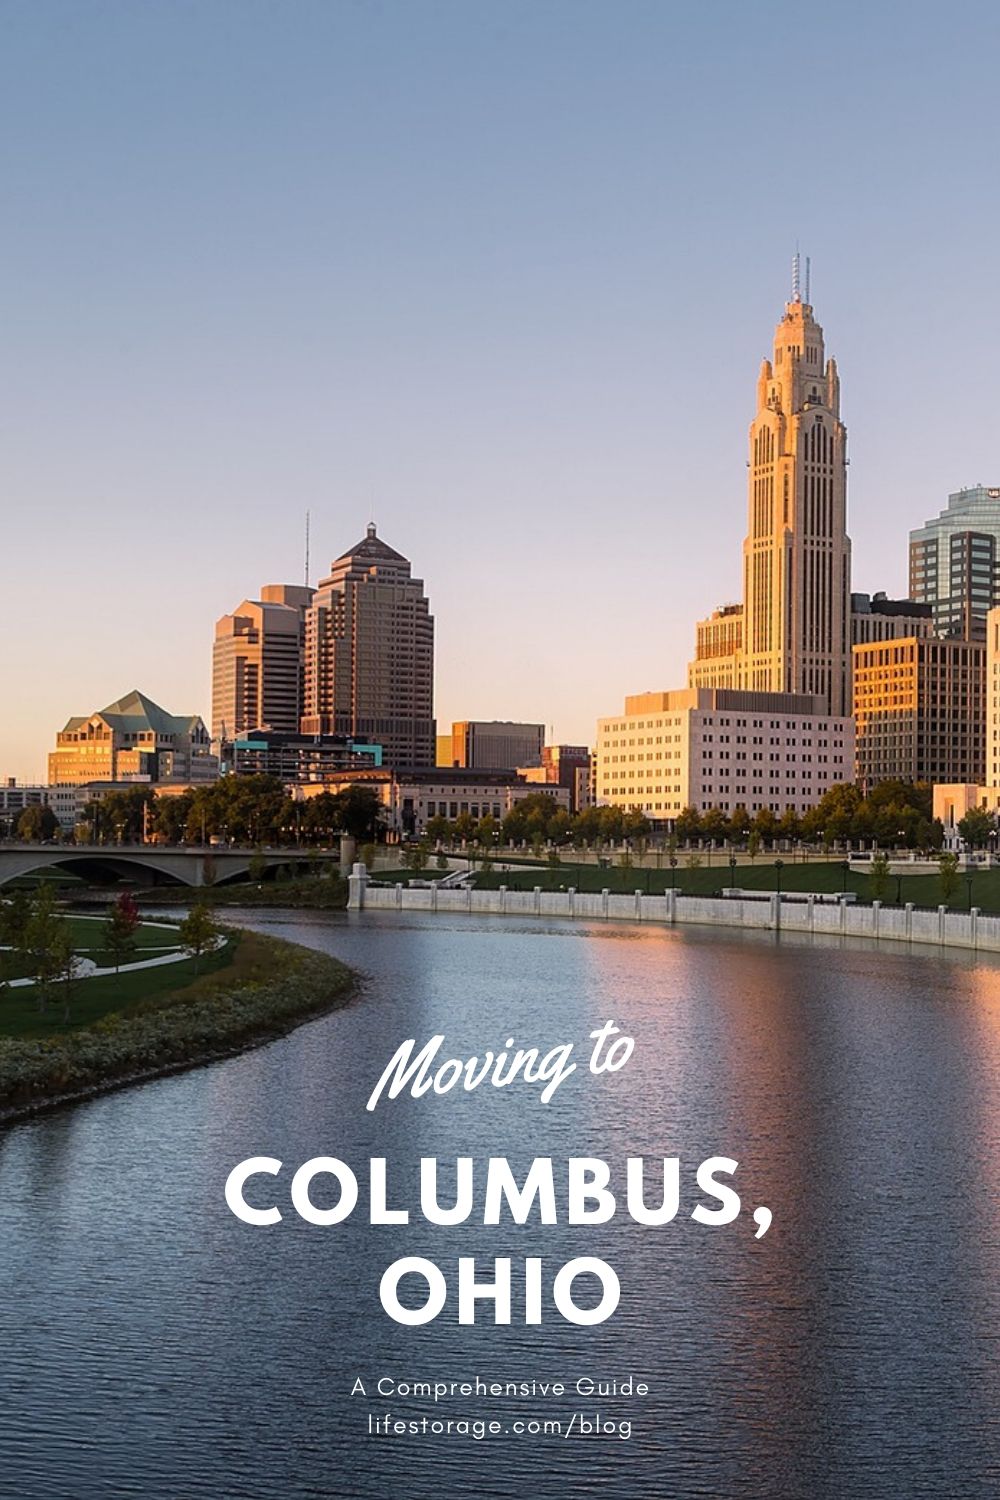 Moving to Columbus - A Comprehensive Guide - Life Storage